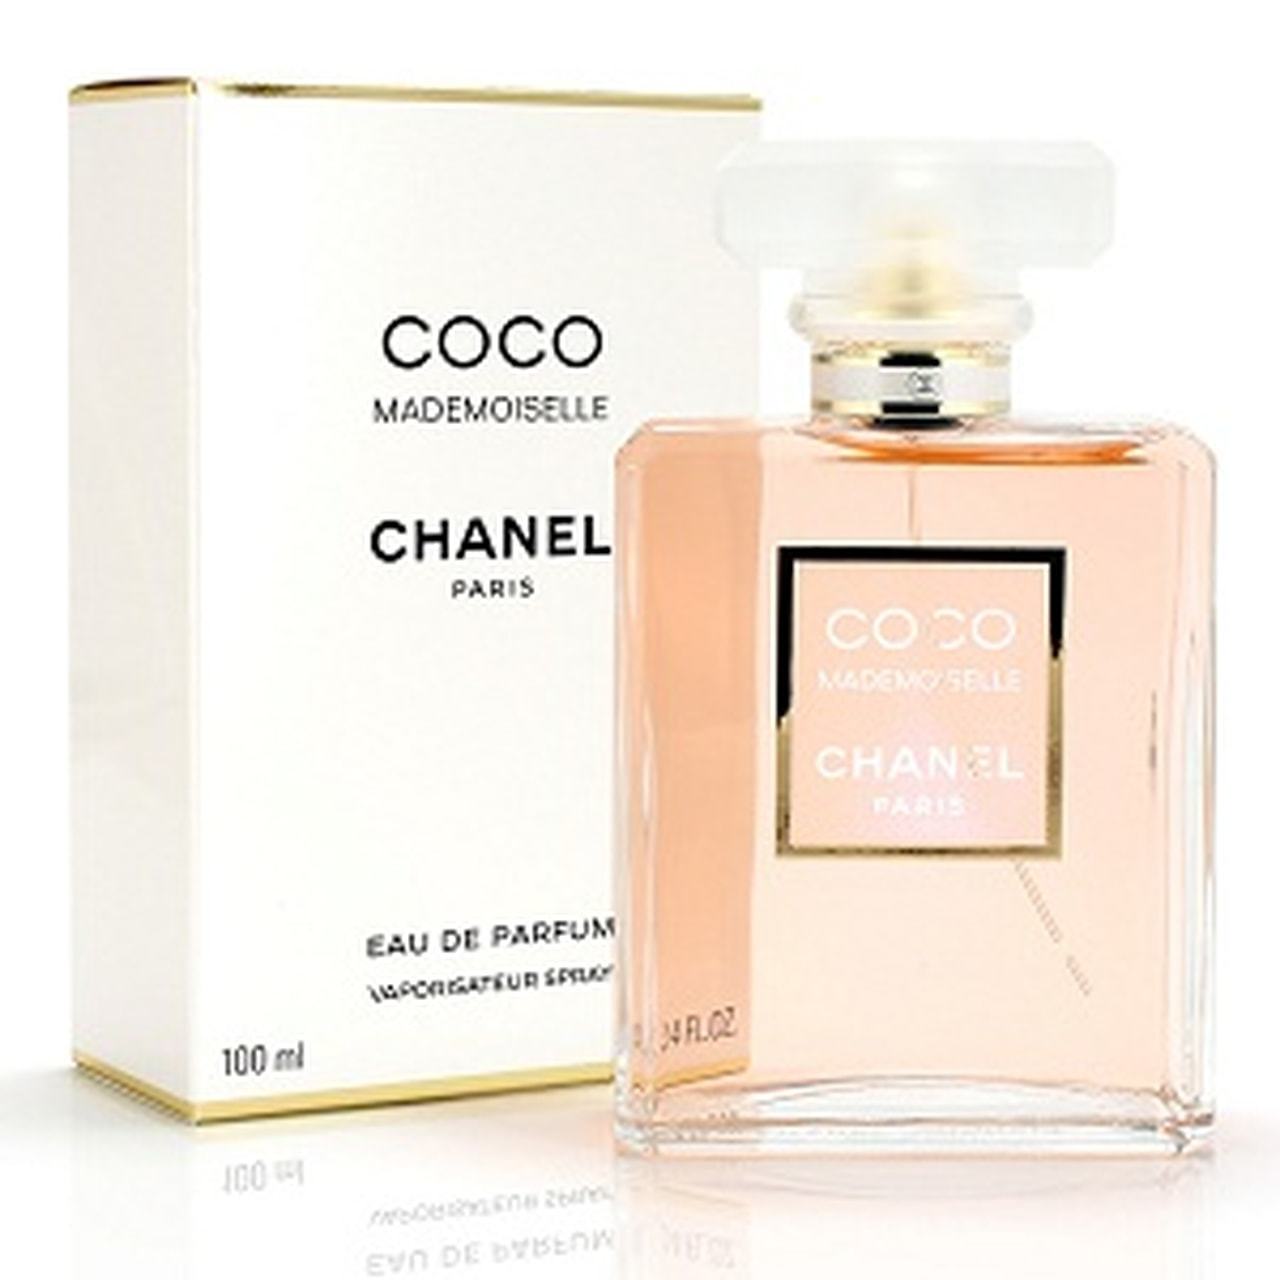 Chanel Coco Mademoiselle Eau De Parfum Spray 35ml12oz buy in United  States with free shipping CosmoStore